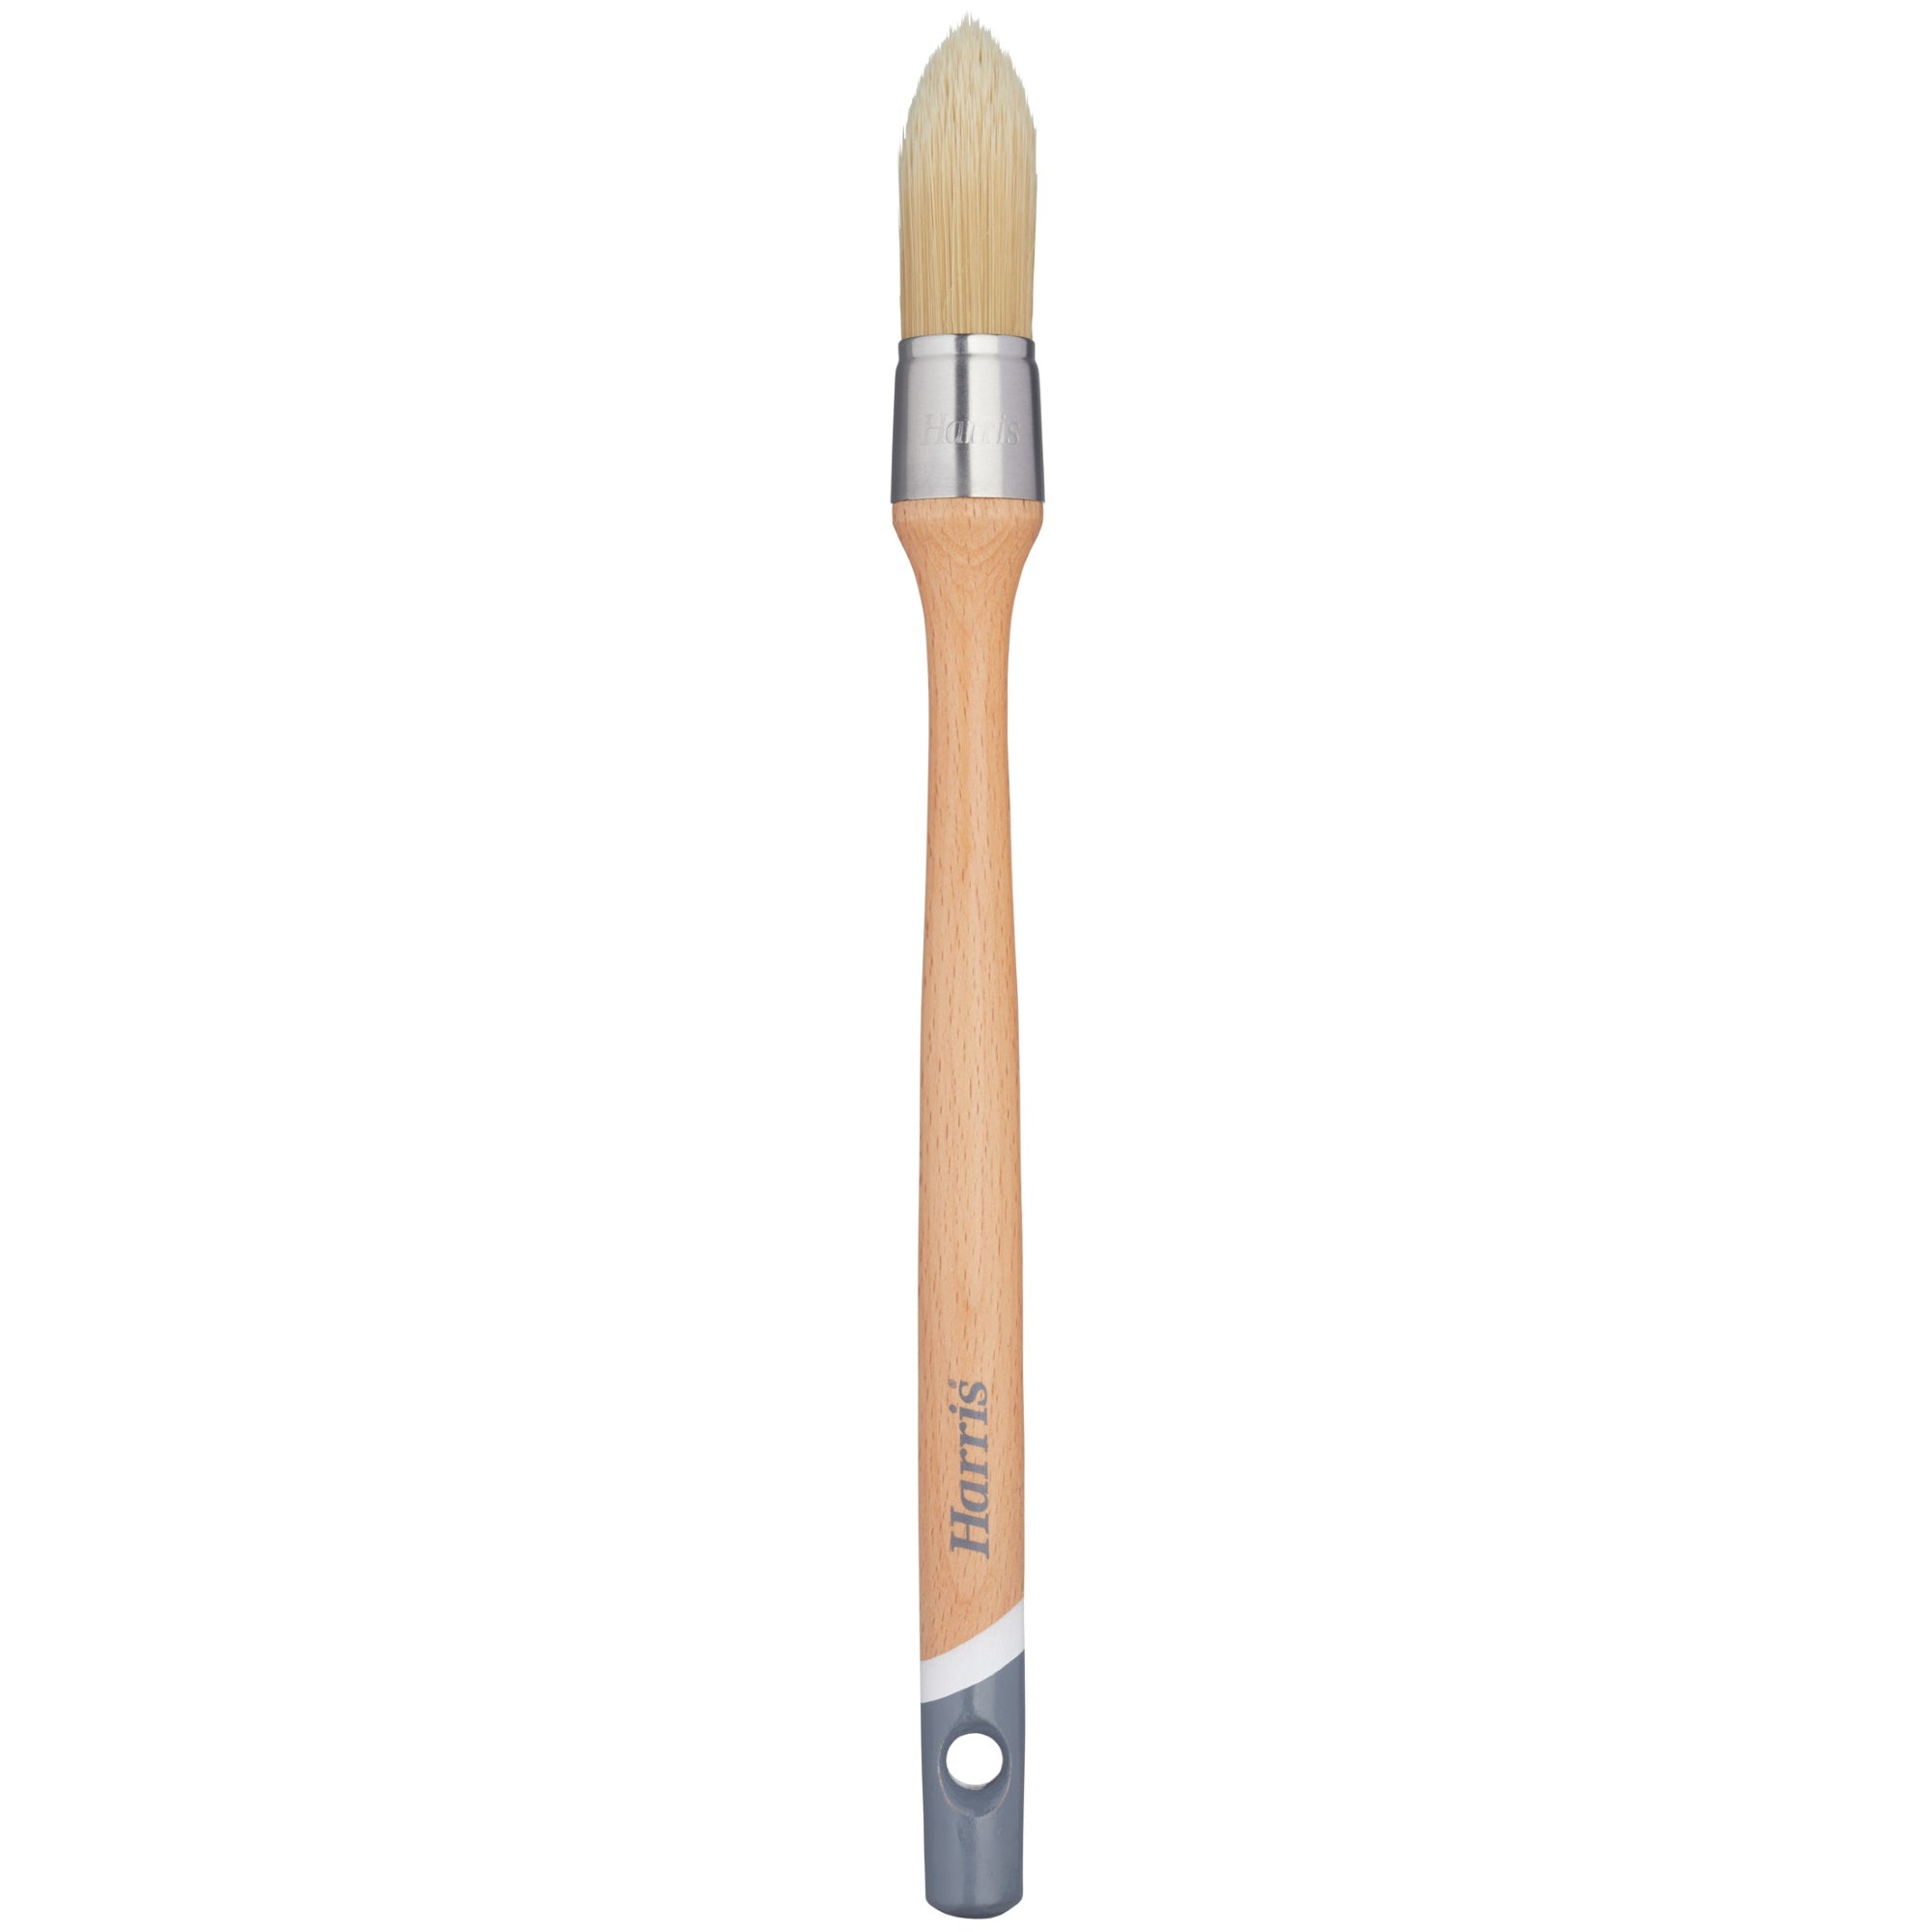 Harris Ultimate 103021071 Woodwork Stain & Varnish Round Paint Brush 21mm - Premium Paint Brushes from HARRIS - Just $2! Shop now at W Hurst & Son (IW) Ltd